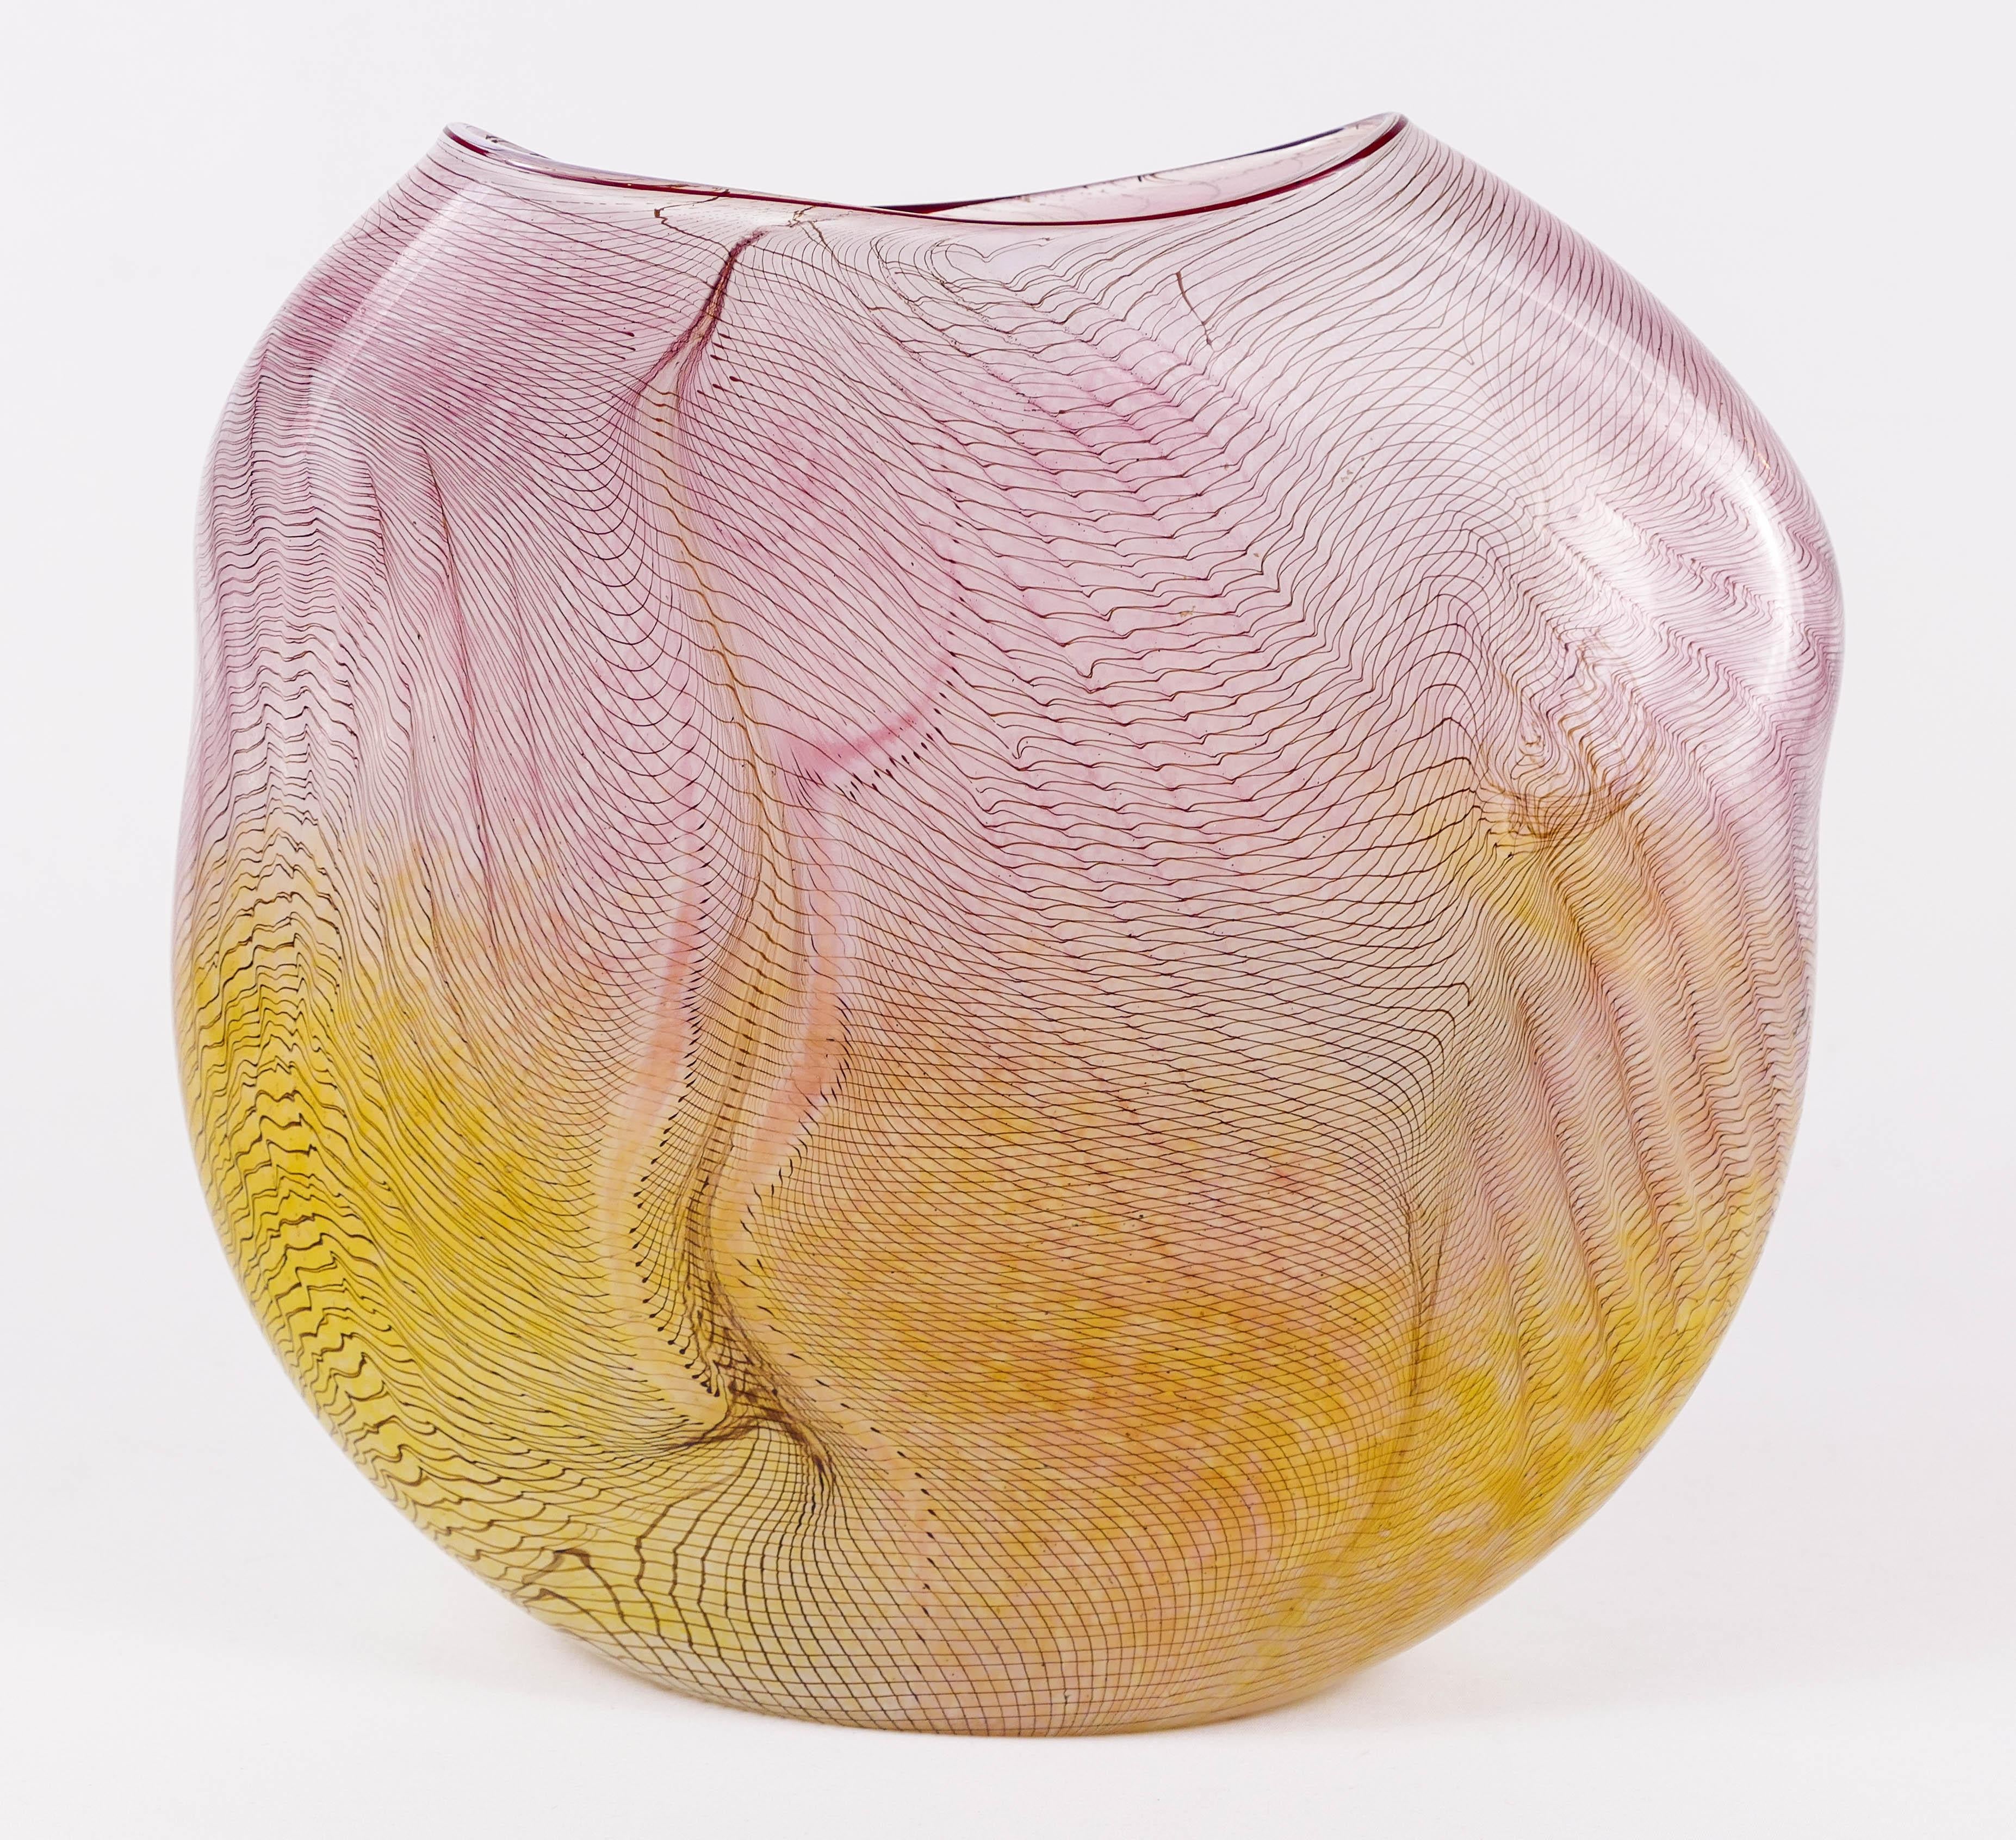 Exceptional early pillow vase by William Morris. Pink to yellow coloring with spider web threading. Just beautiful! 